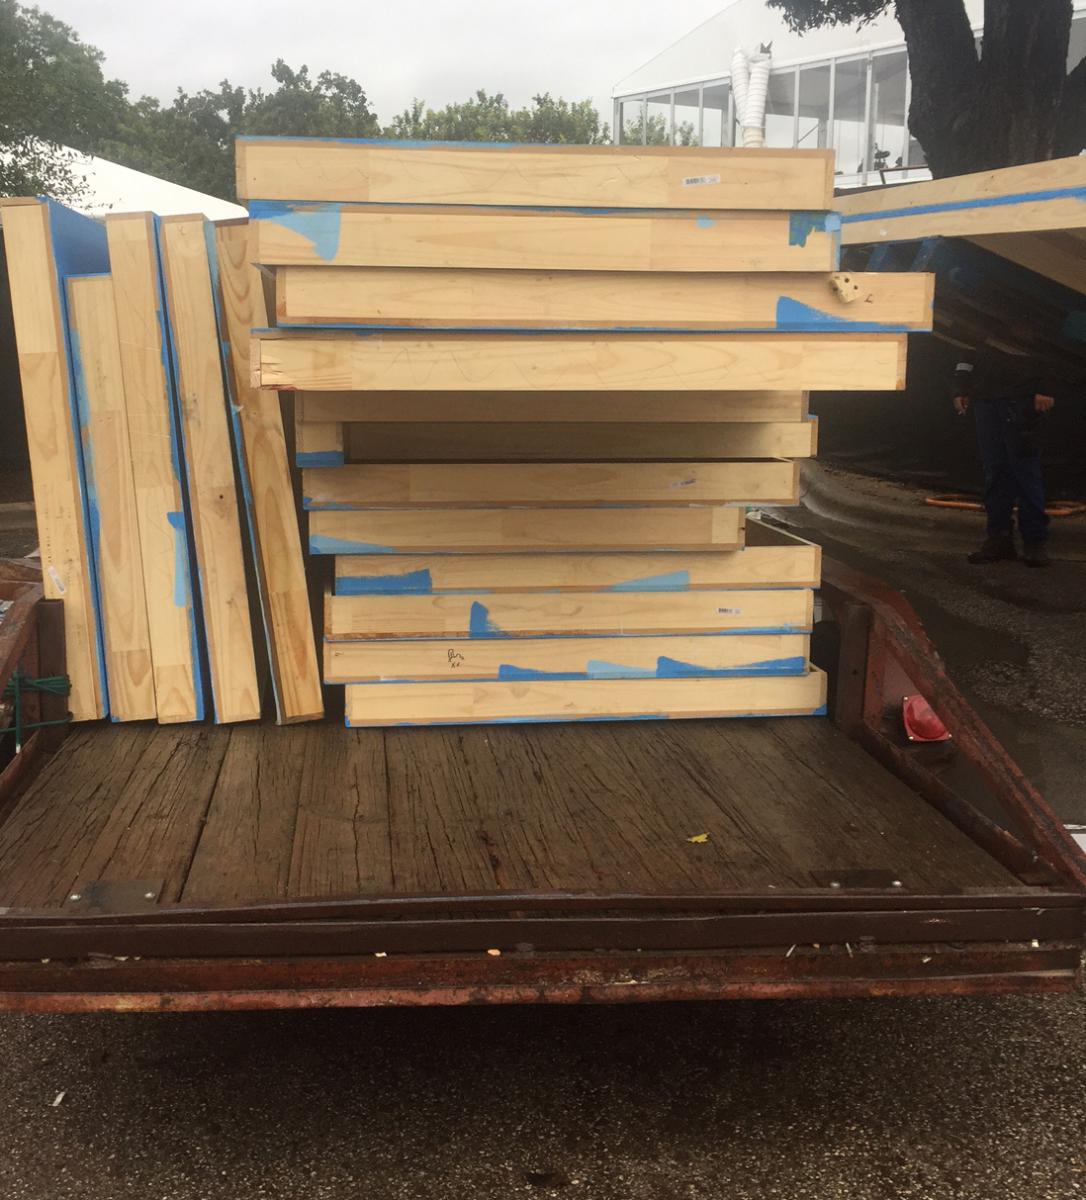 plywood from ACL stage structures being loaded up and sent to community partners for reuse.